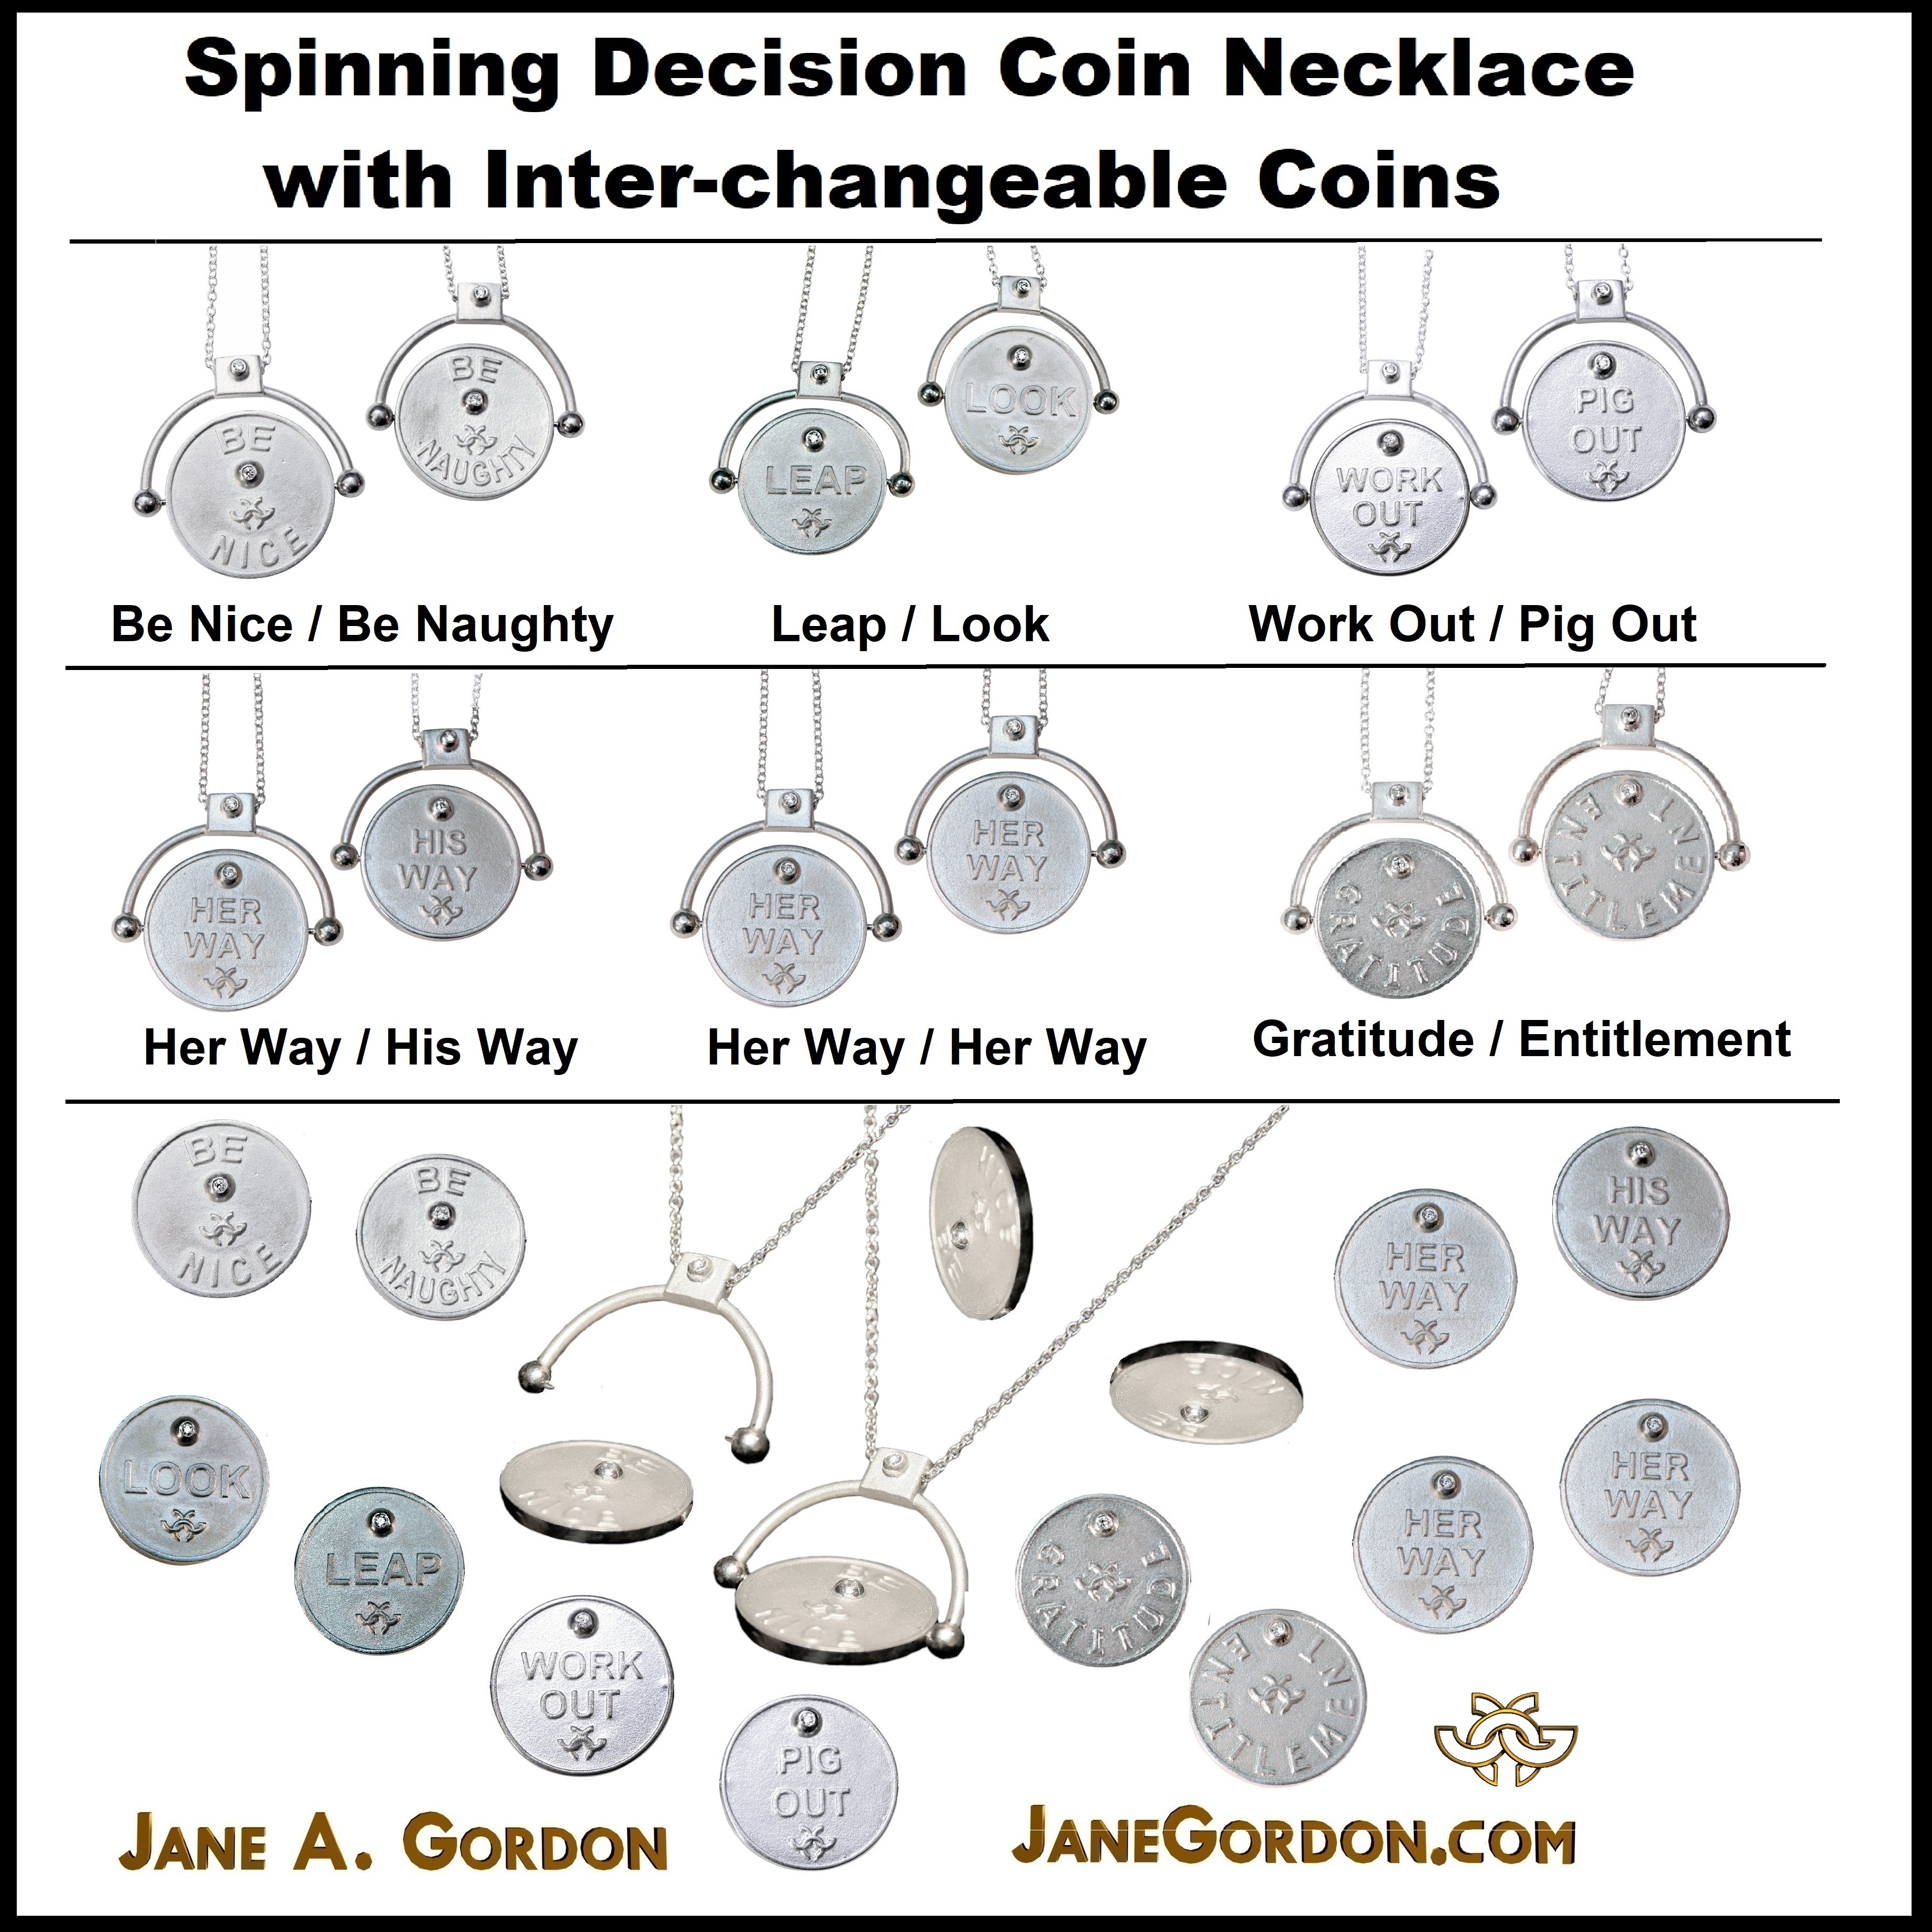 Decision Coins and Spinning Coin Necklace: Jane Gordon Jewelry